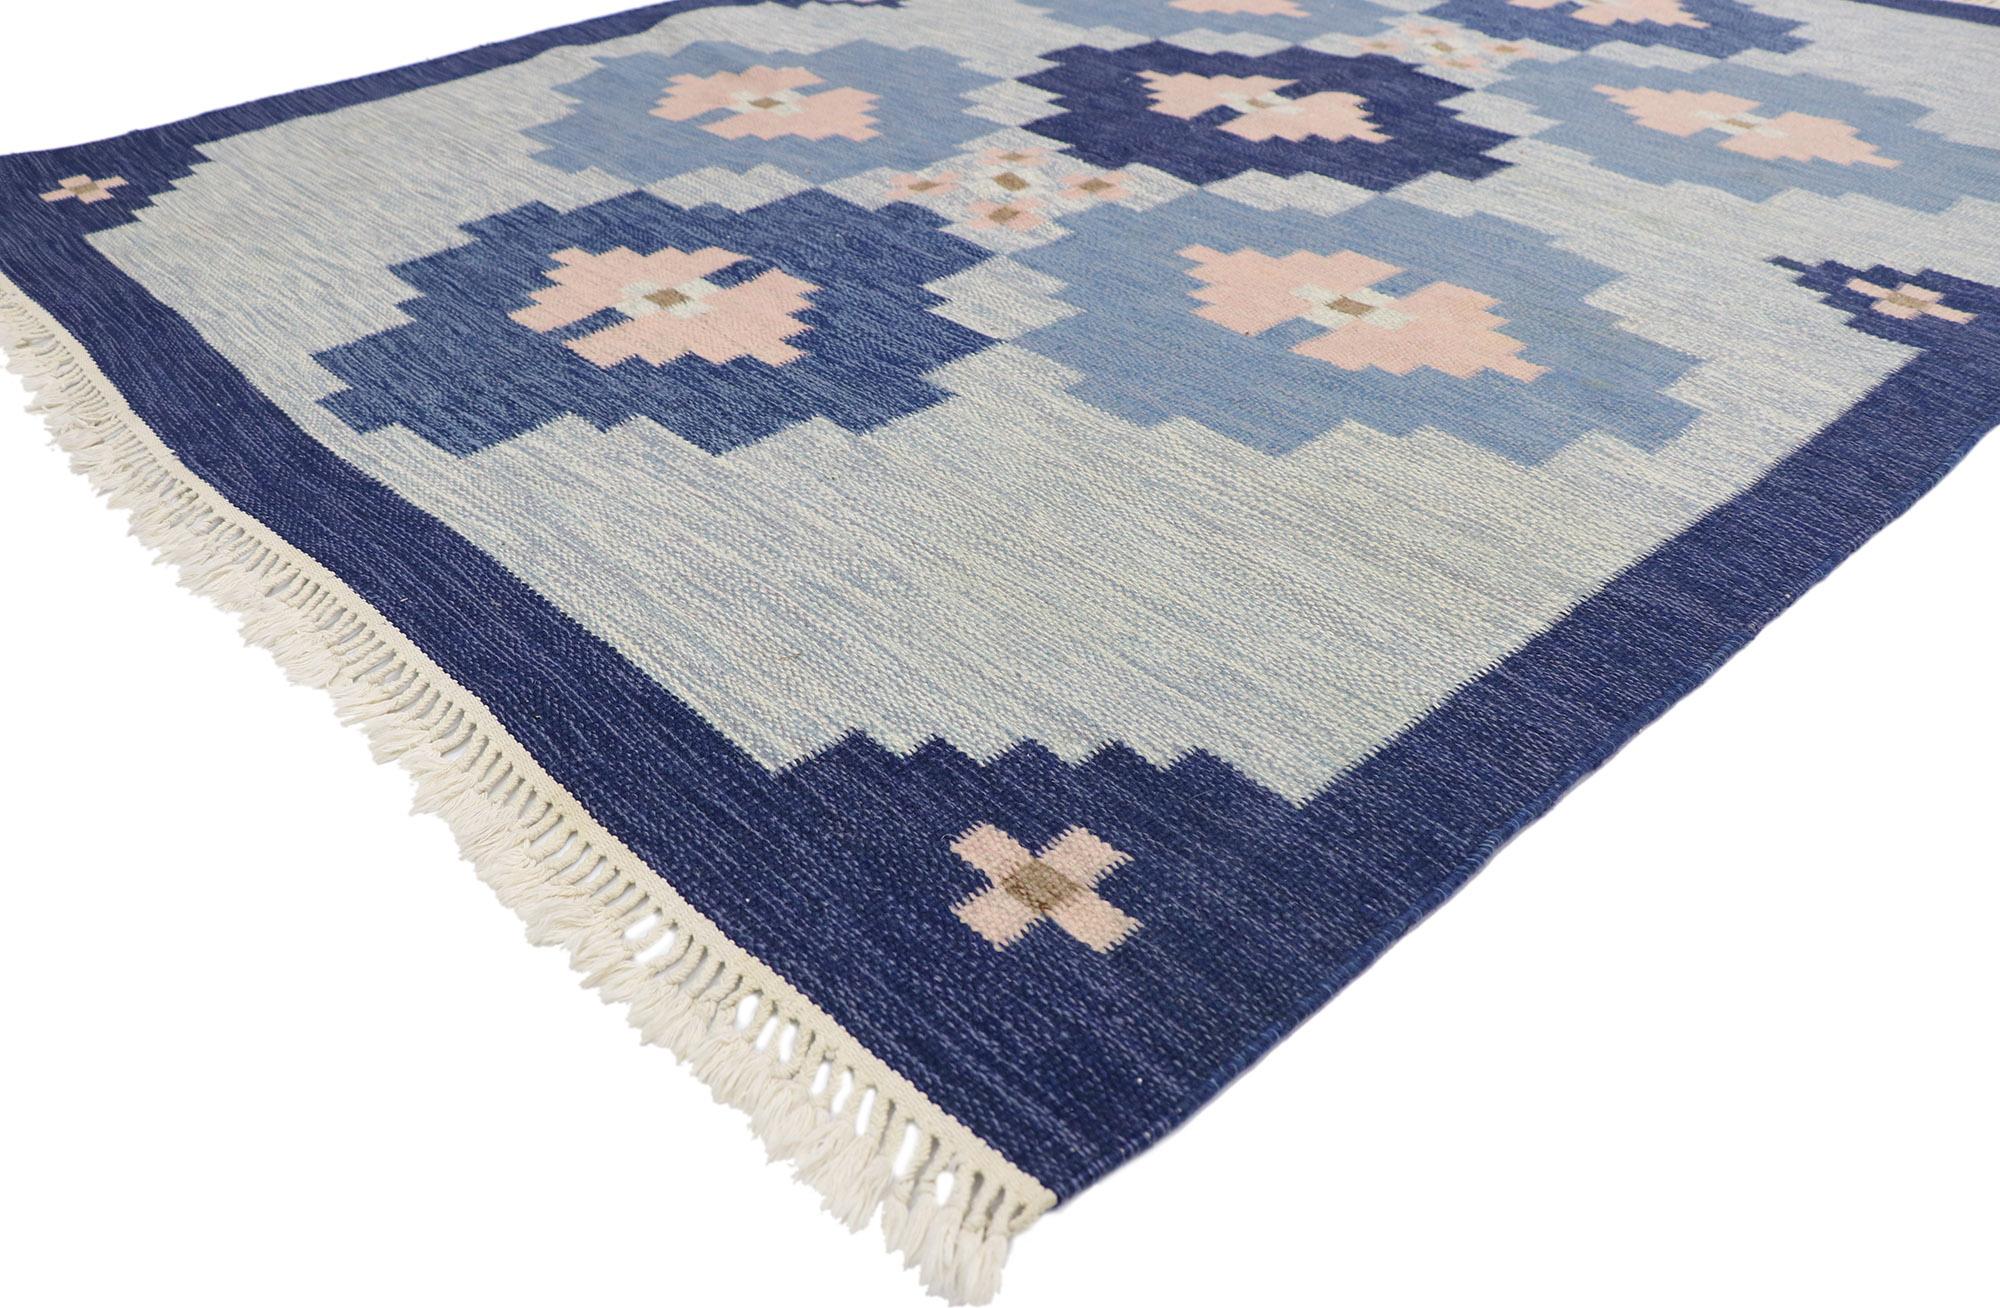 78107 vintage Swedish Kilim Rollakan rug with Scandinavian Modern style 05'09 x 07'08. With its geometric design and bohemian hygge vibes, this hand-woven wool Swedish Kilim rug beautifully embodies the simplicity of Scandinavian modern style. The